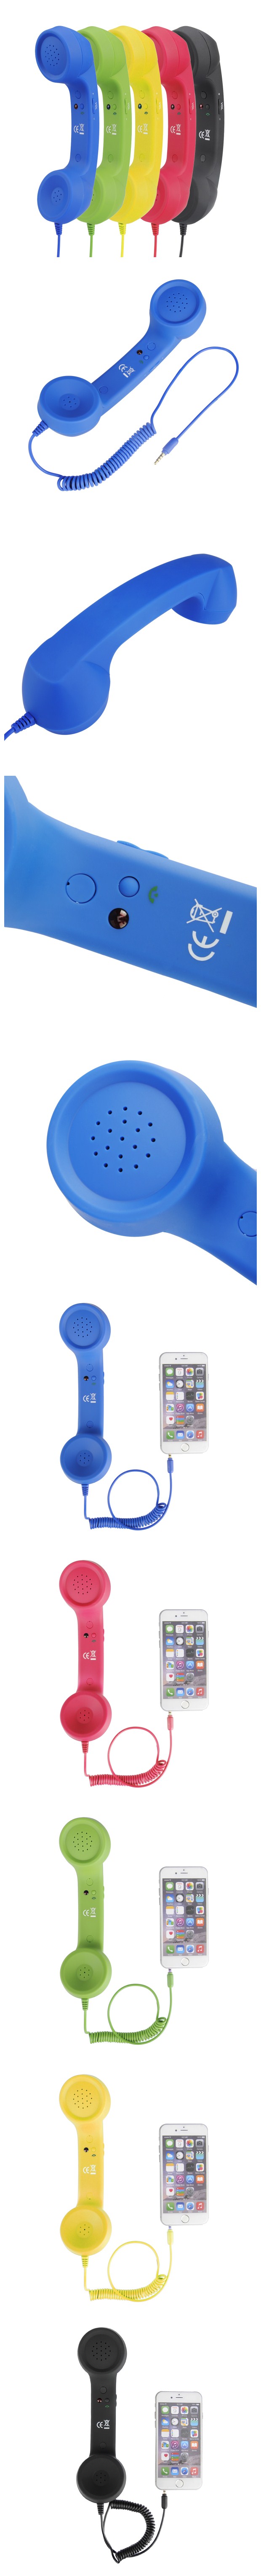 3.5mm Retro Telephone Handset Anti-Radiation Phone Classic Receiver with Microphone For iPhone Mobile Phone